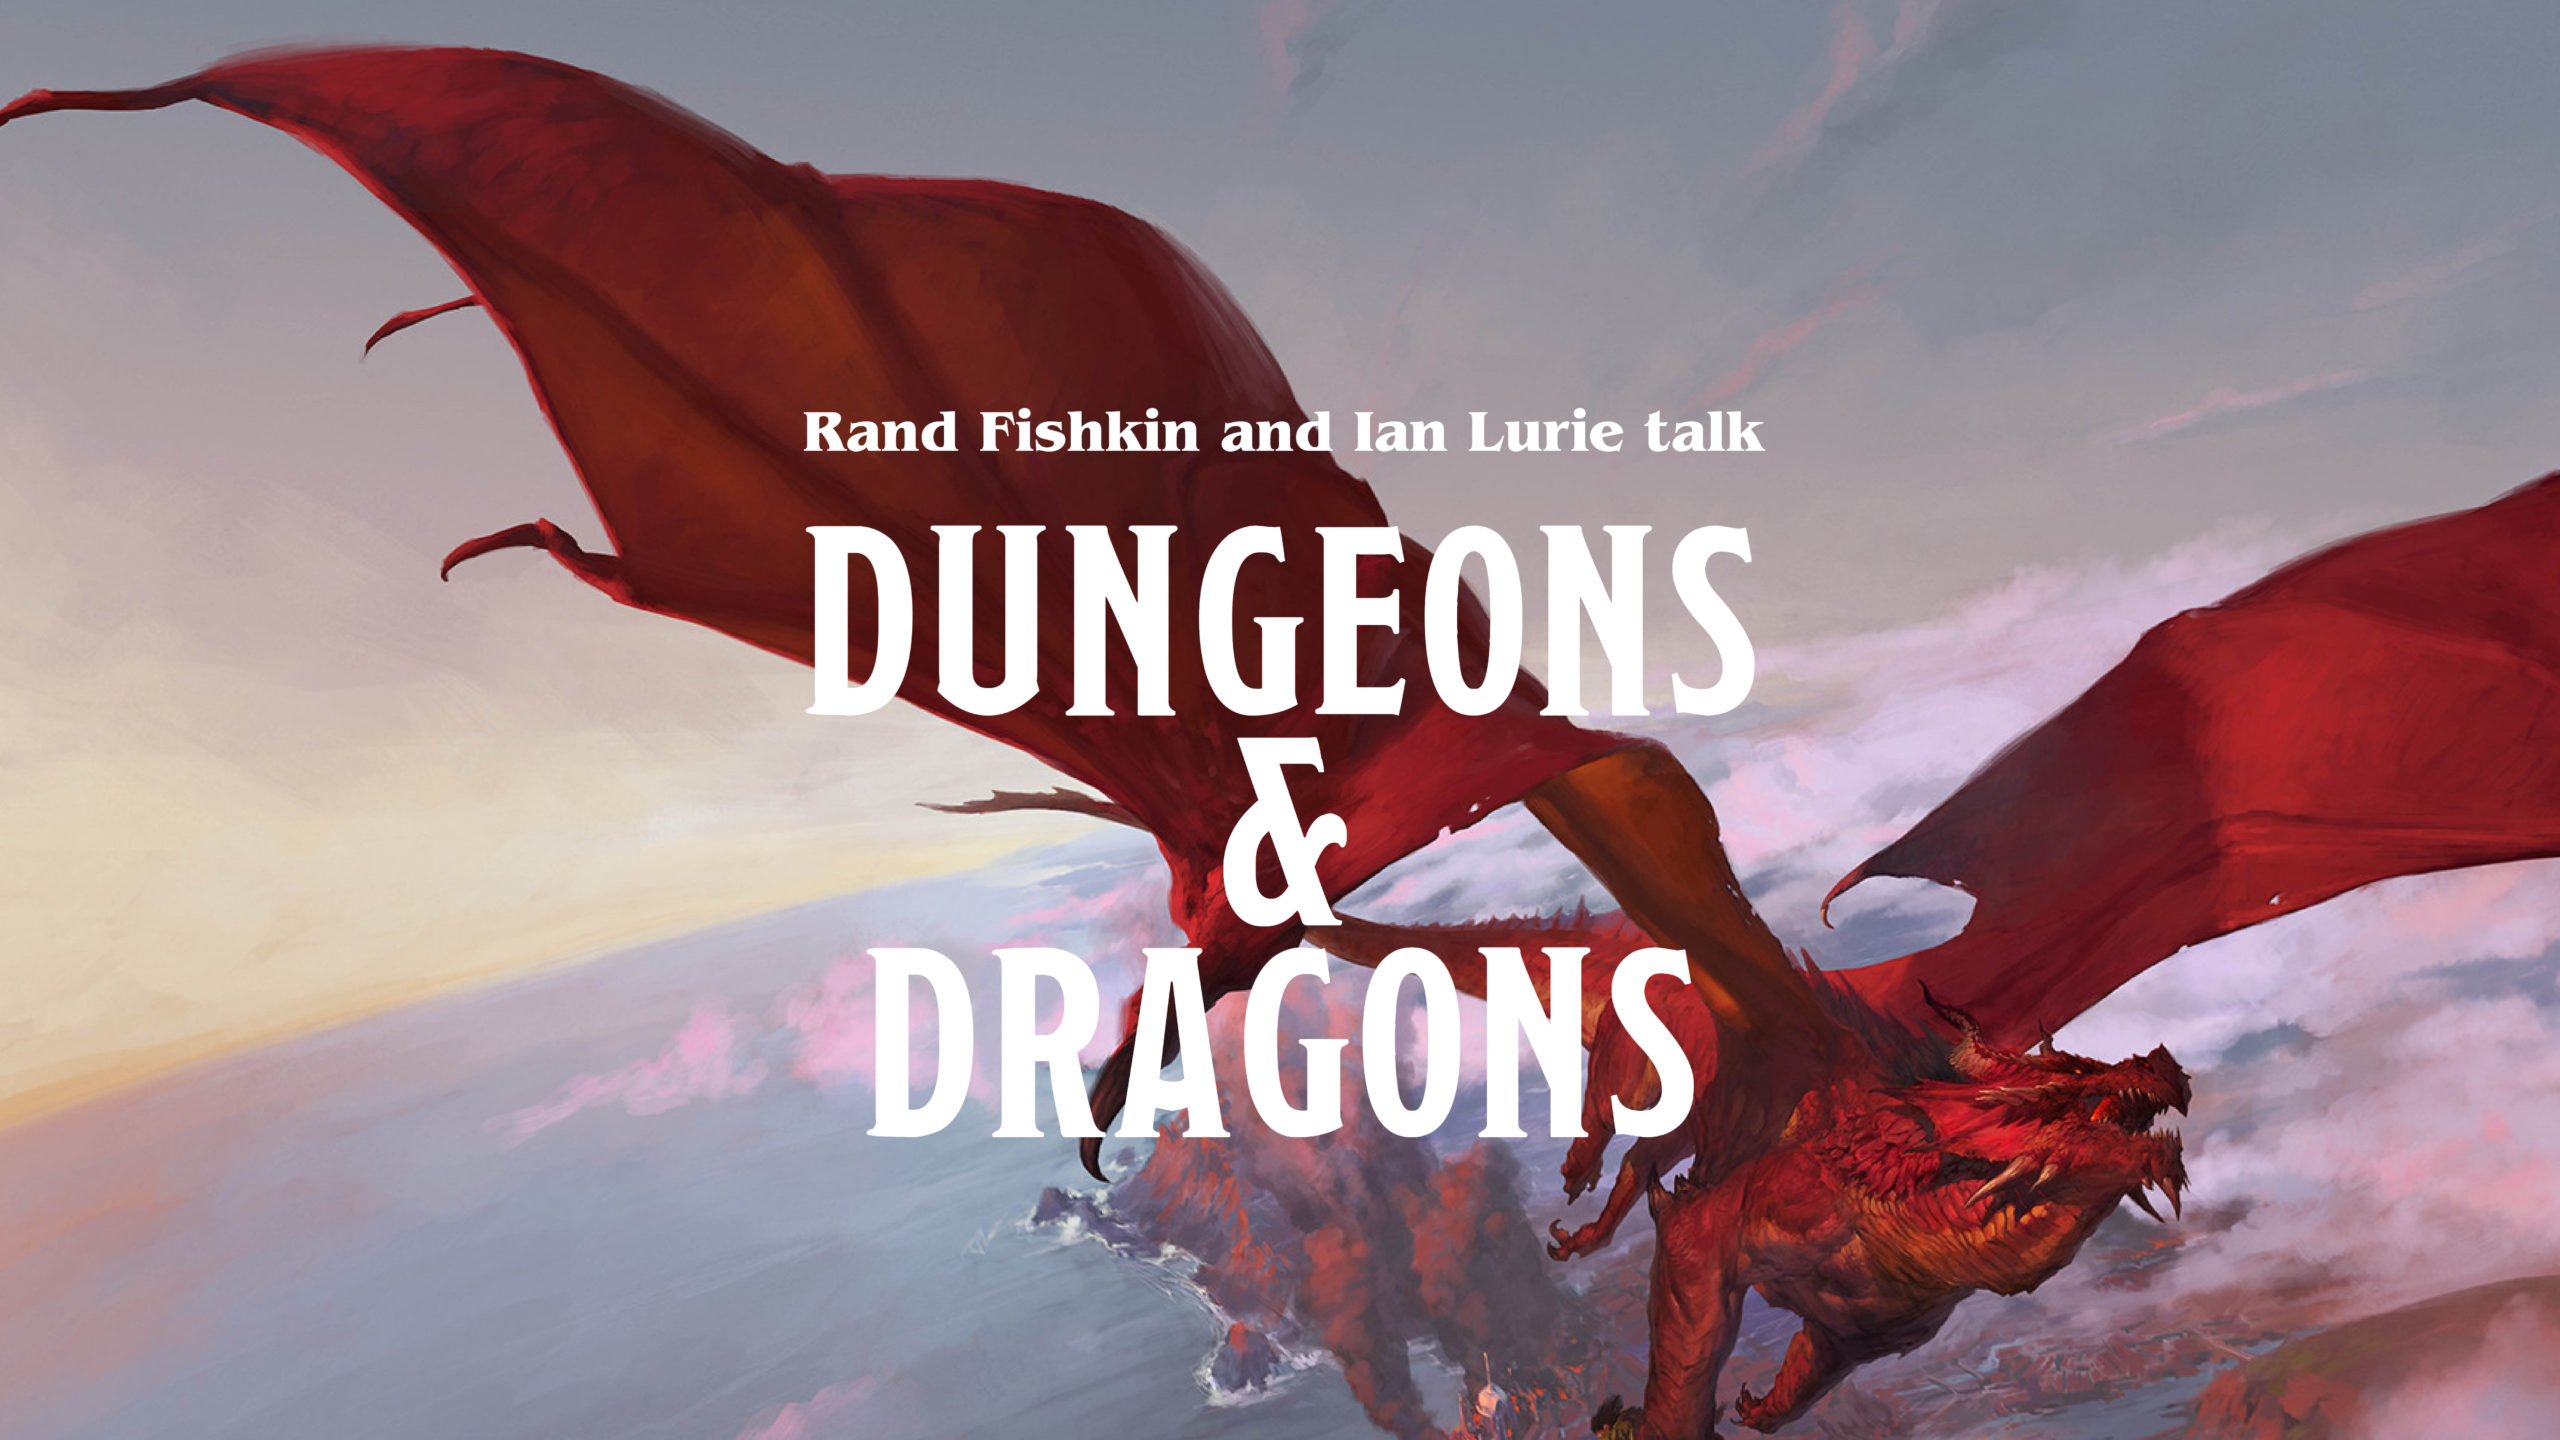 Rand Fishkin and Ian Lurie talk Dungeons and Dragons